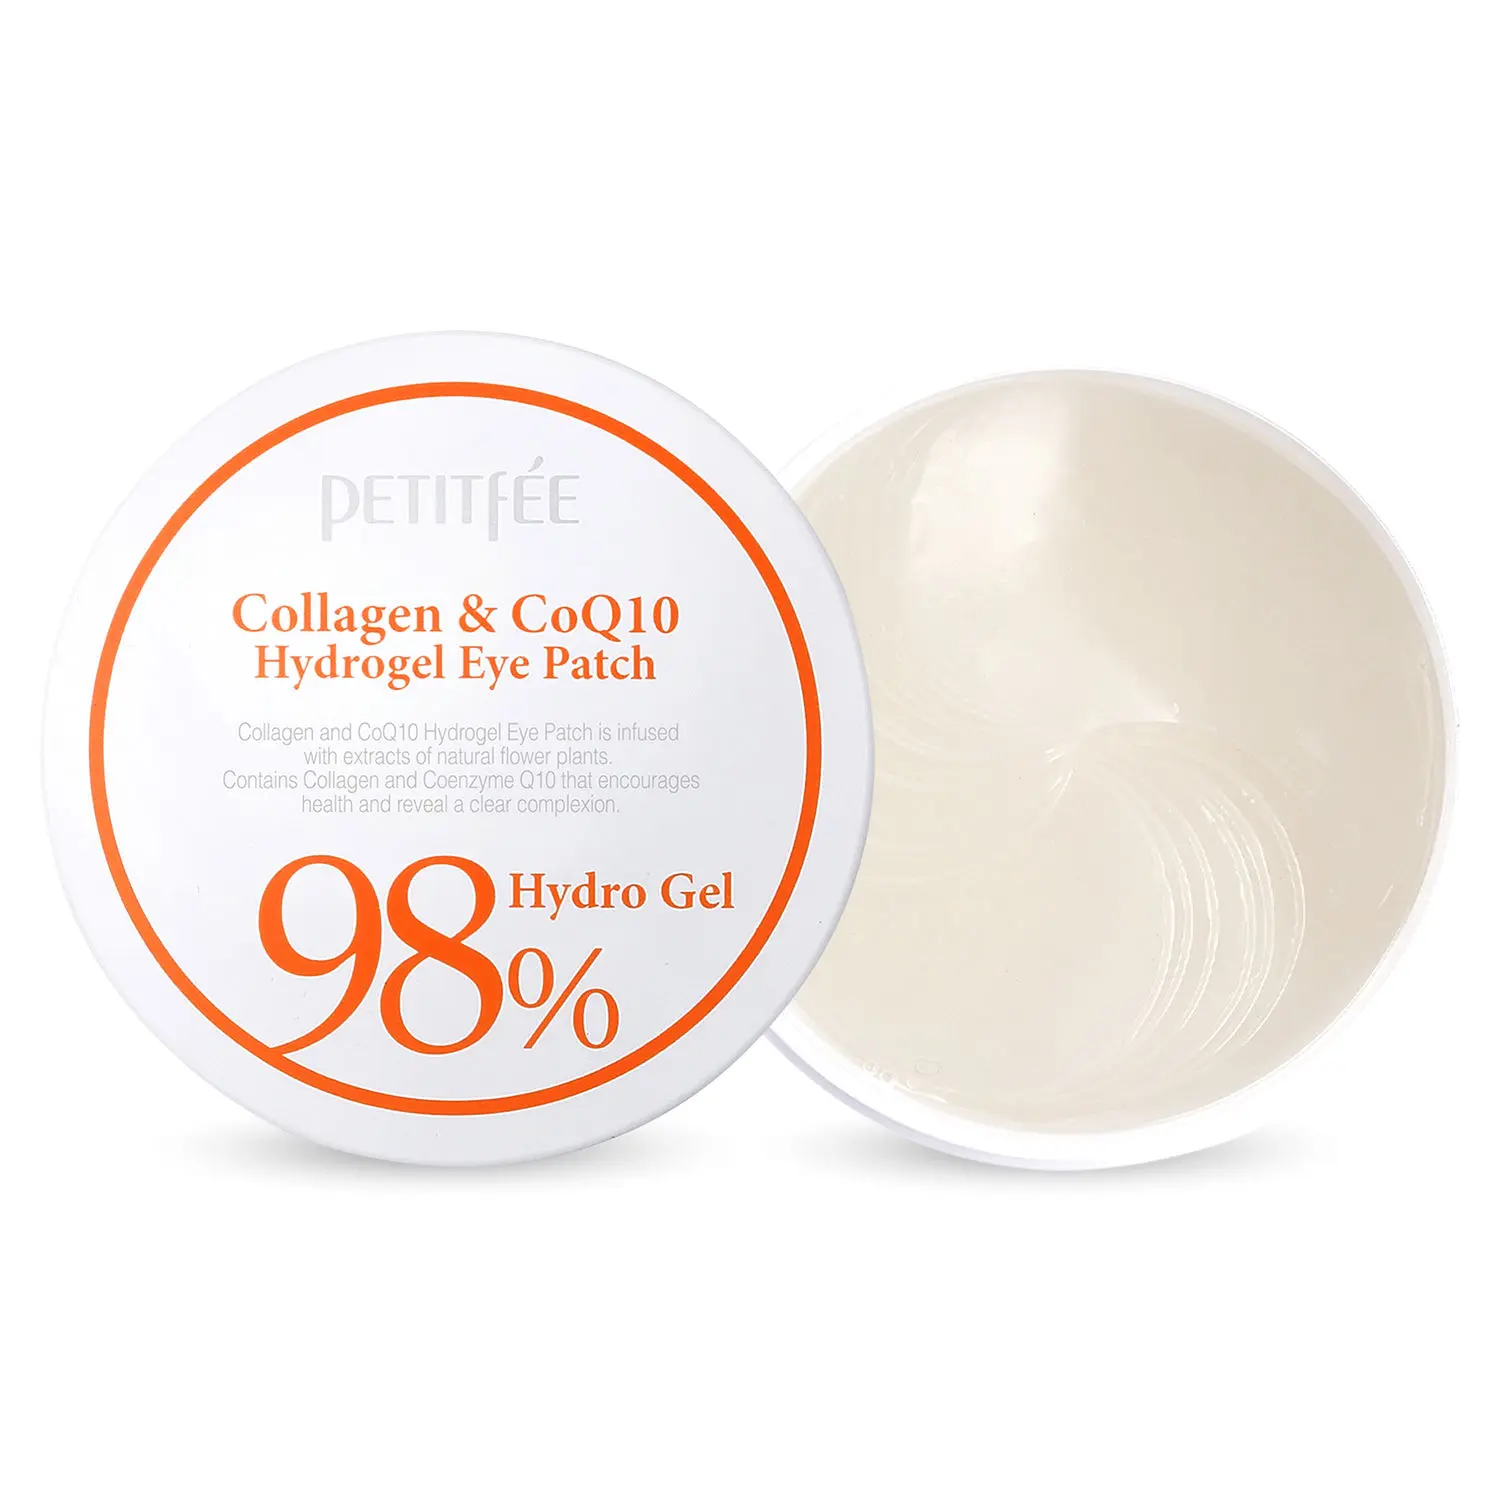 PETITfEE Collagen & CoQ10 Hydrogel Eye Patch are infused with extracts of natural flower plants. This eye patch supplies moist collagen to your dry eye rims. Moisturizing layer of collagen increases the collagen deficiency in the skin.